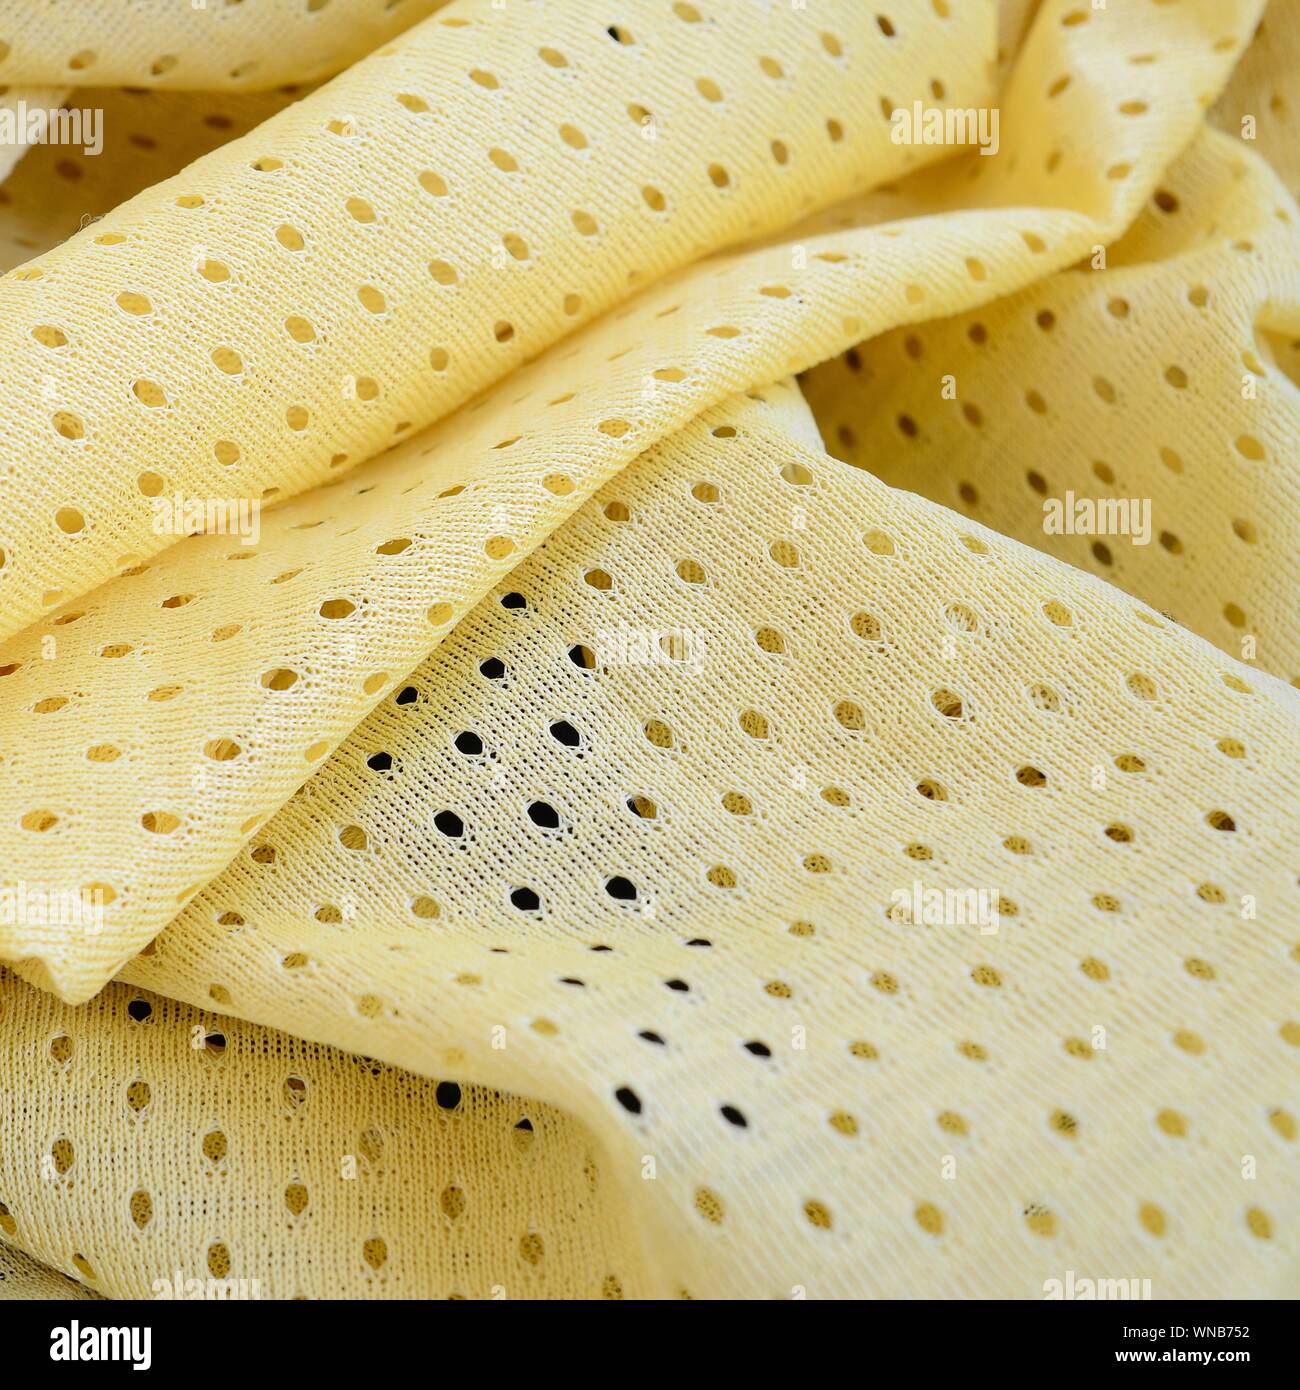 Polyester nylon fabric with breathable mesh. Material for sport